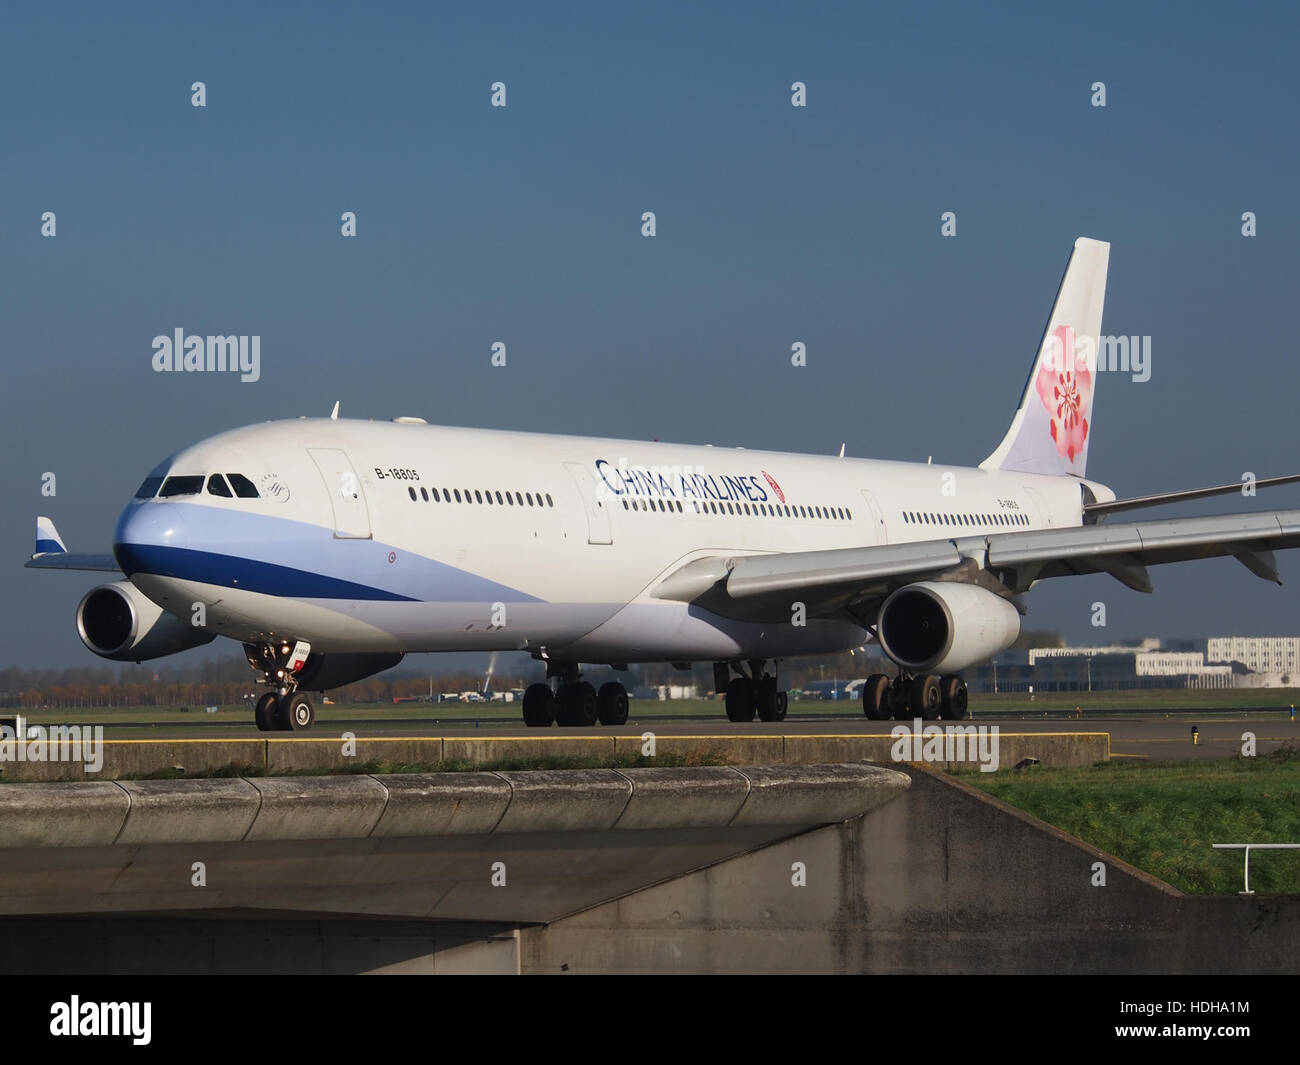 B-18805 (aeromobili) China Airlines Airbus A340-313 - CN 415 a Schiphol pic2 Foto Stock